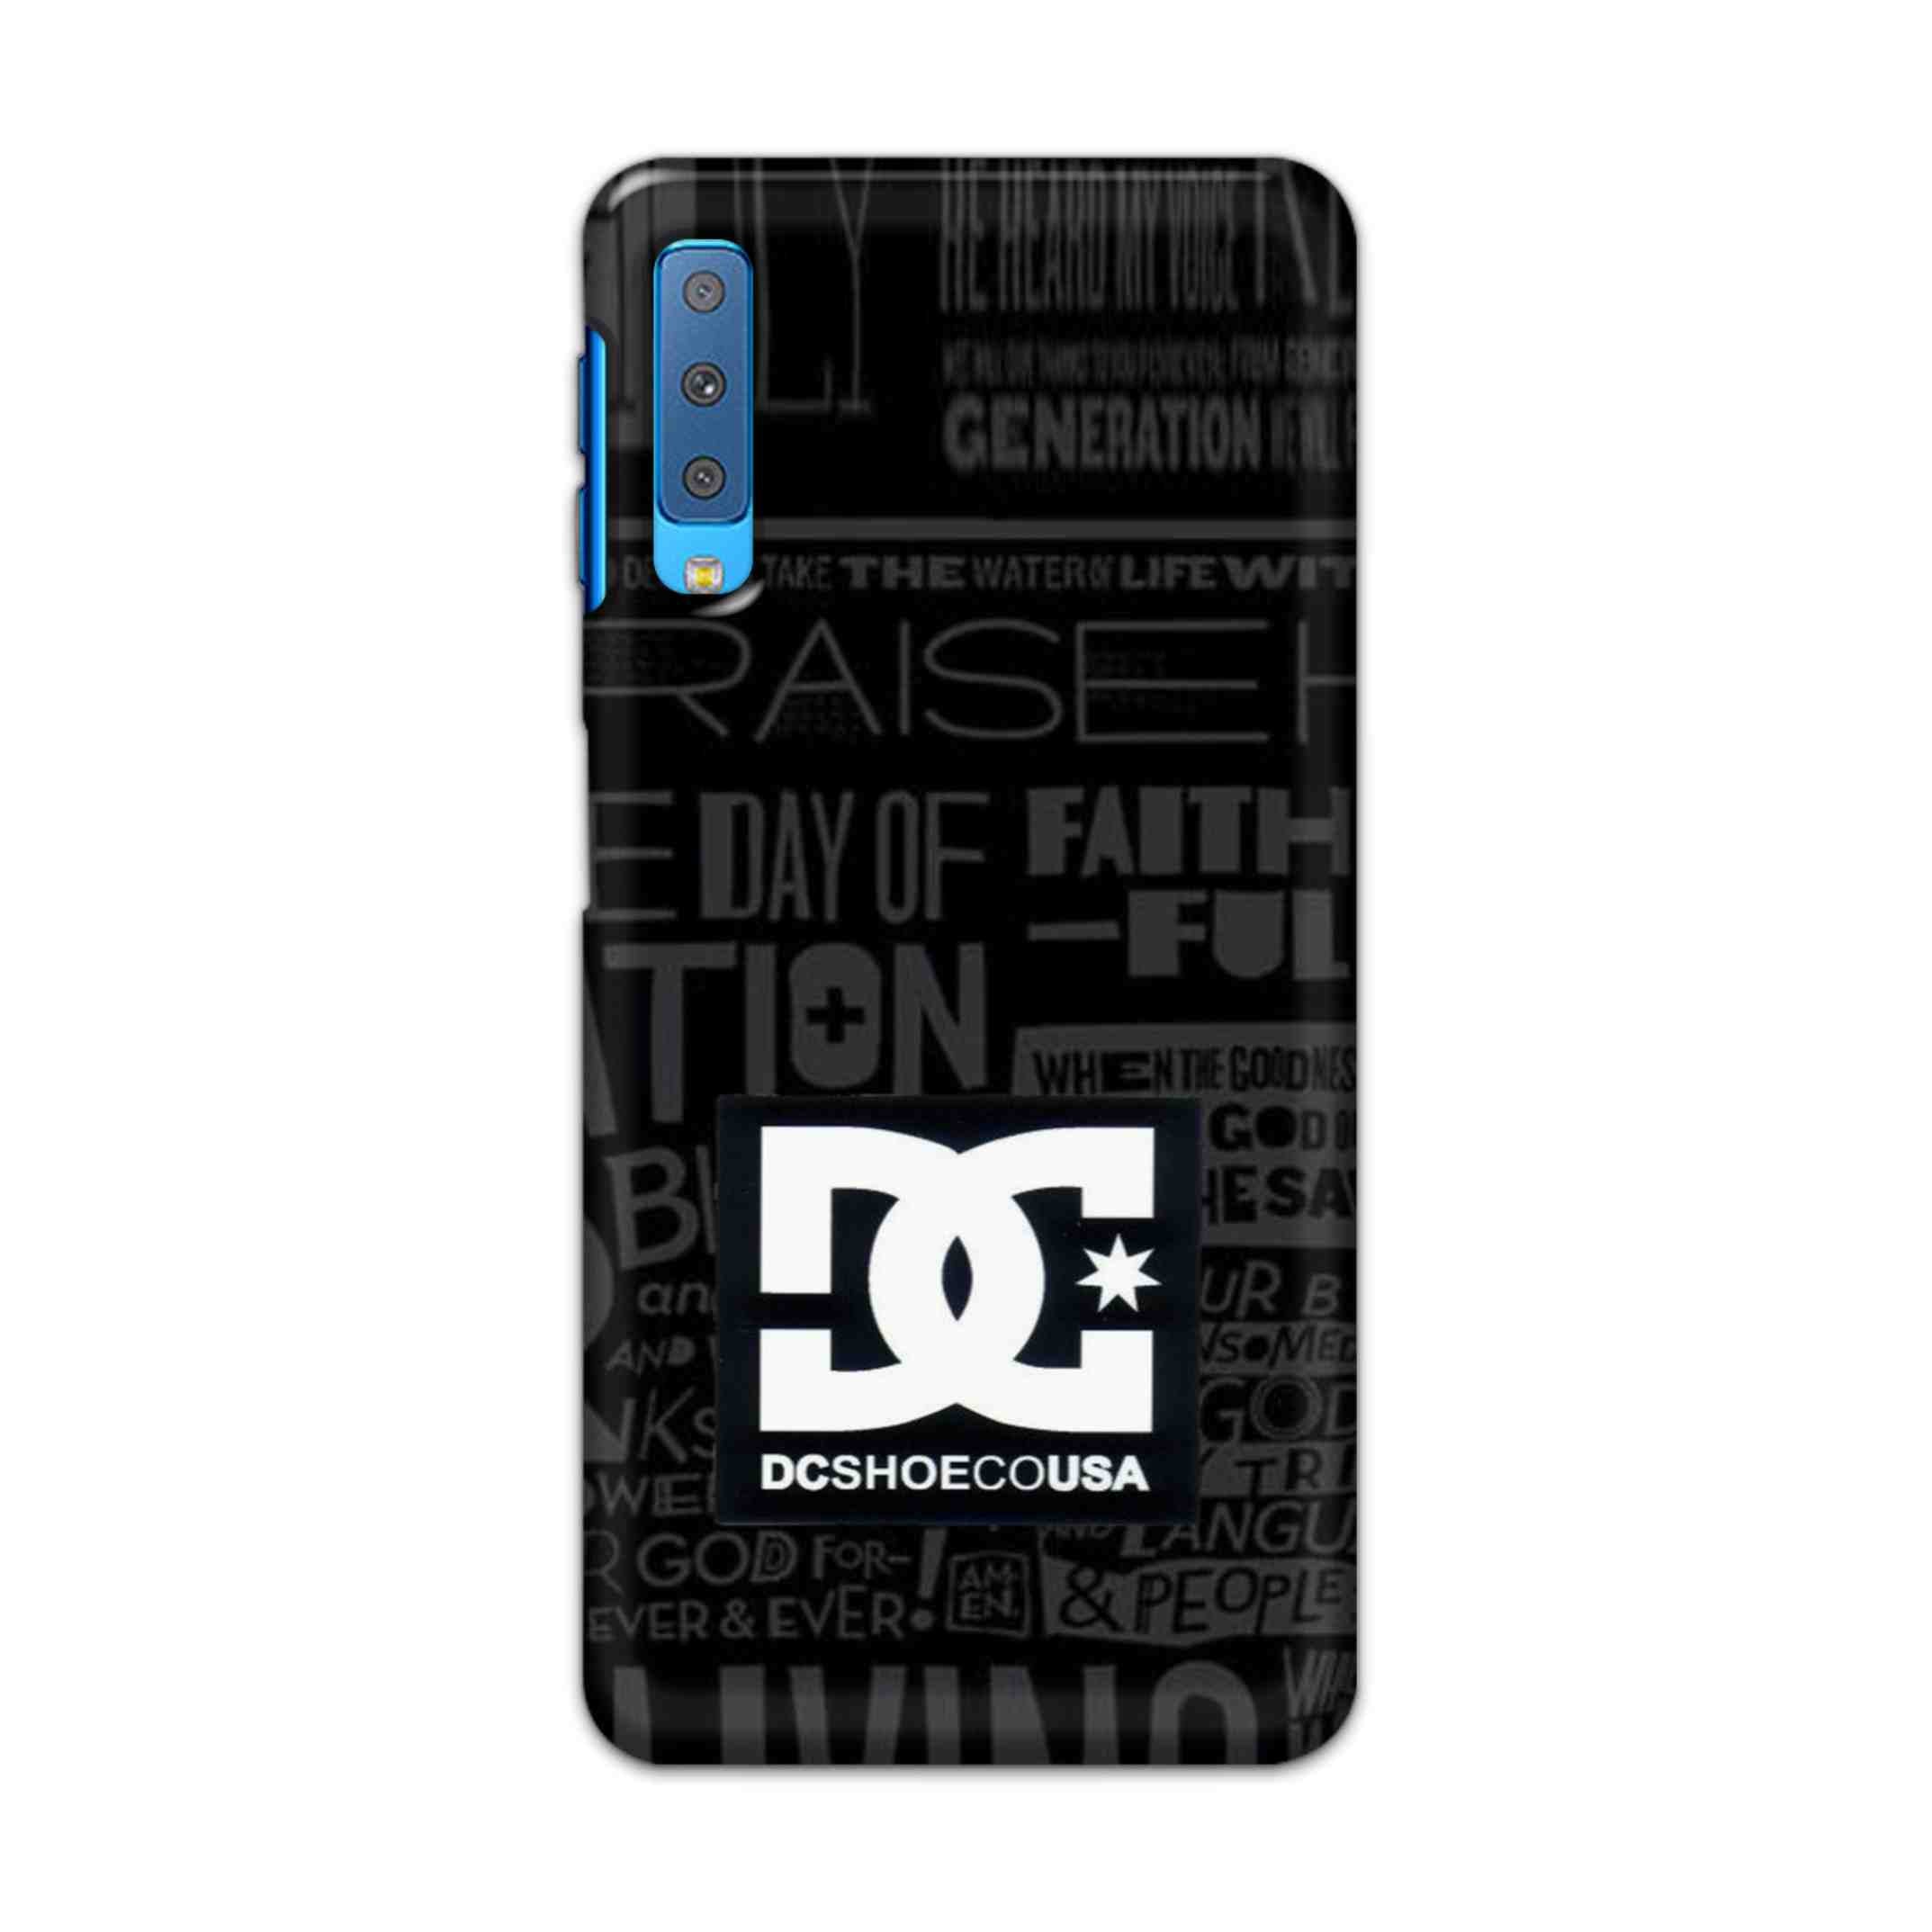 Buy Dc Shoecousa Hard Back Mobile Phone Case Cover For Samsung Galaxy A7 2018 Online